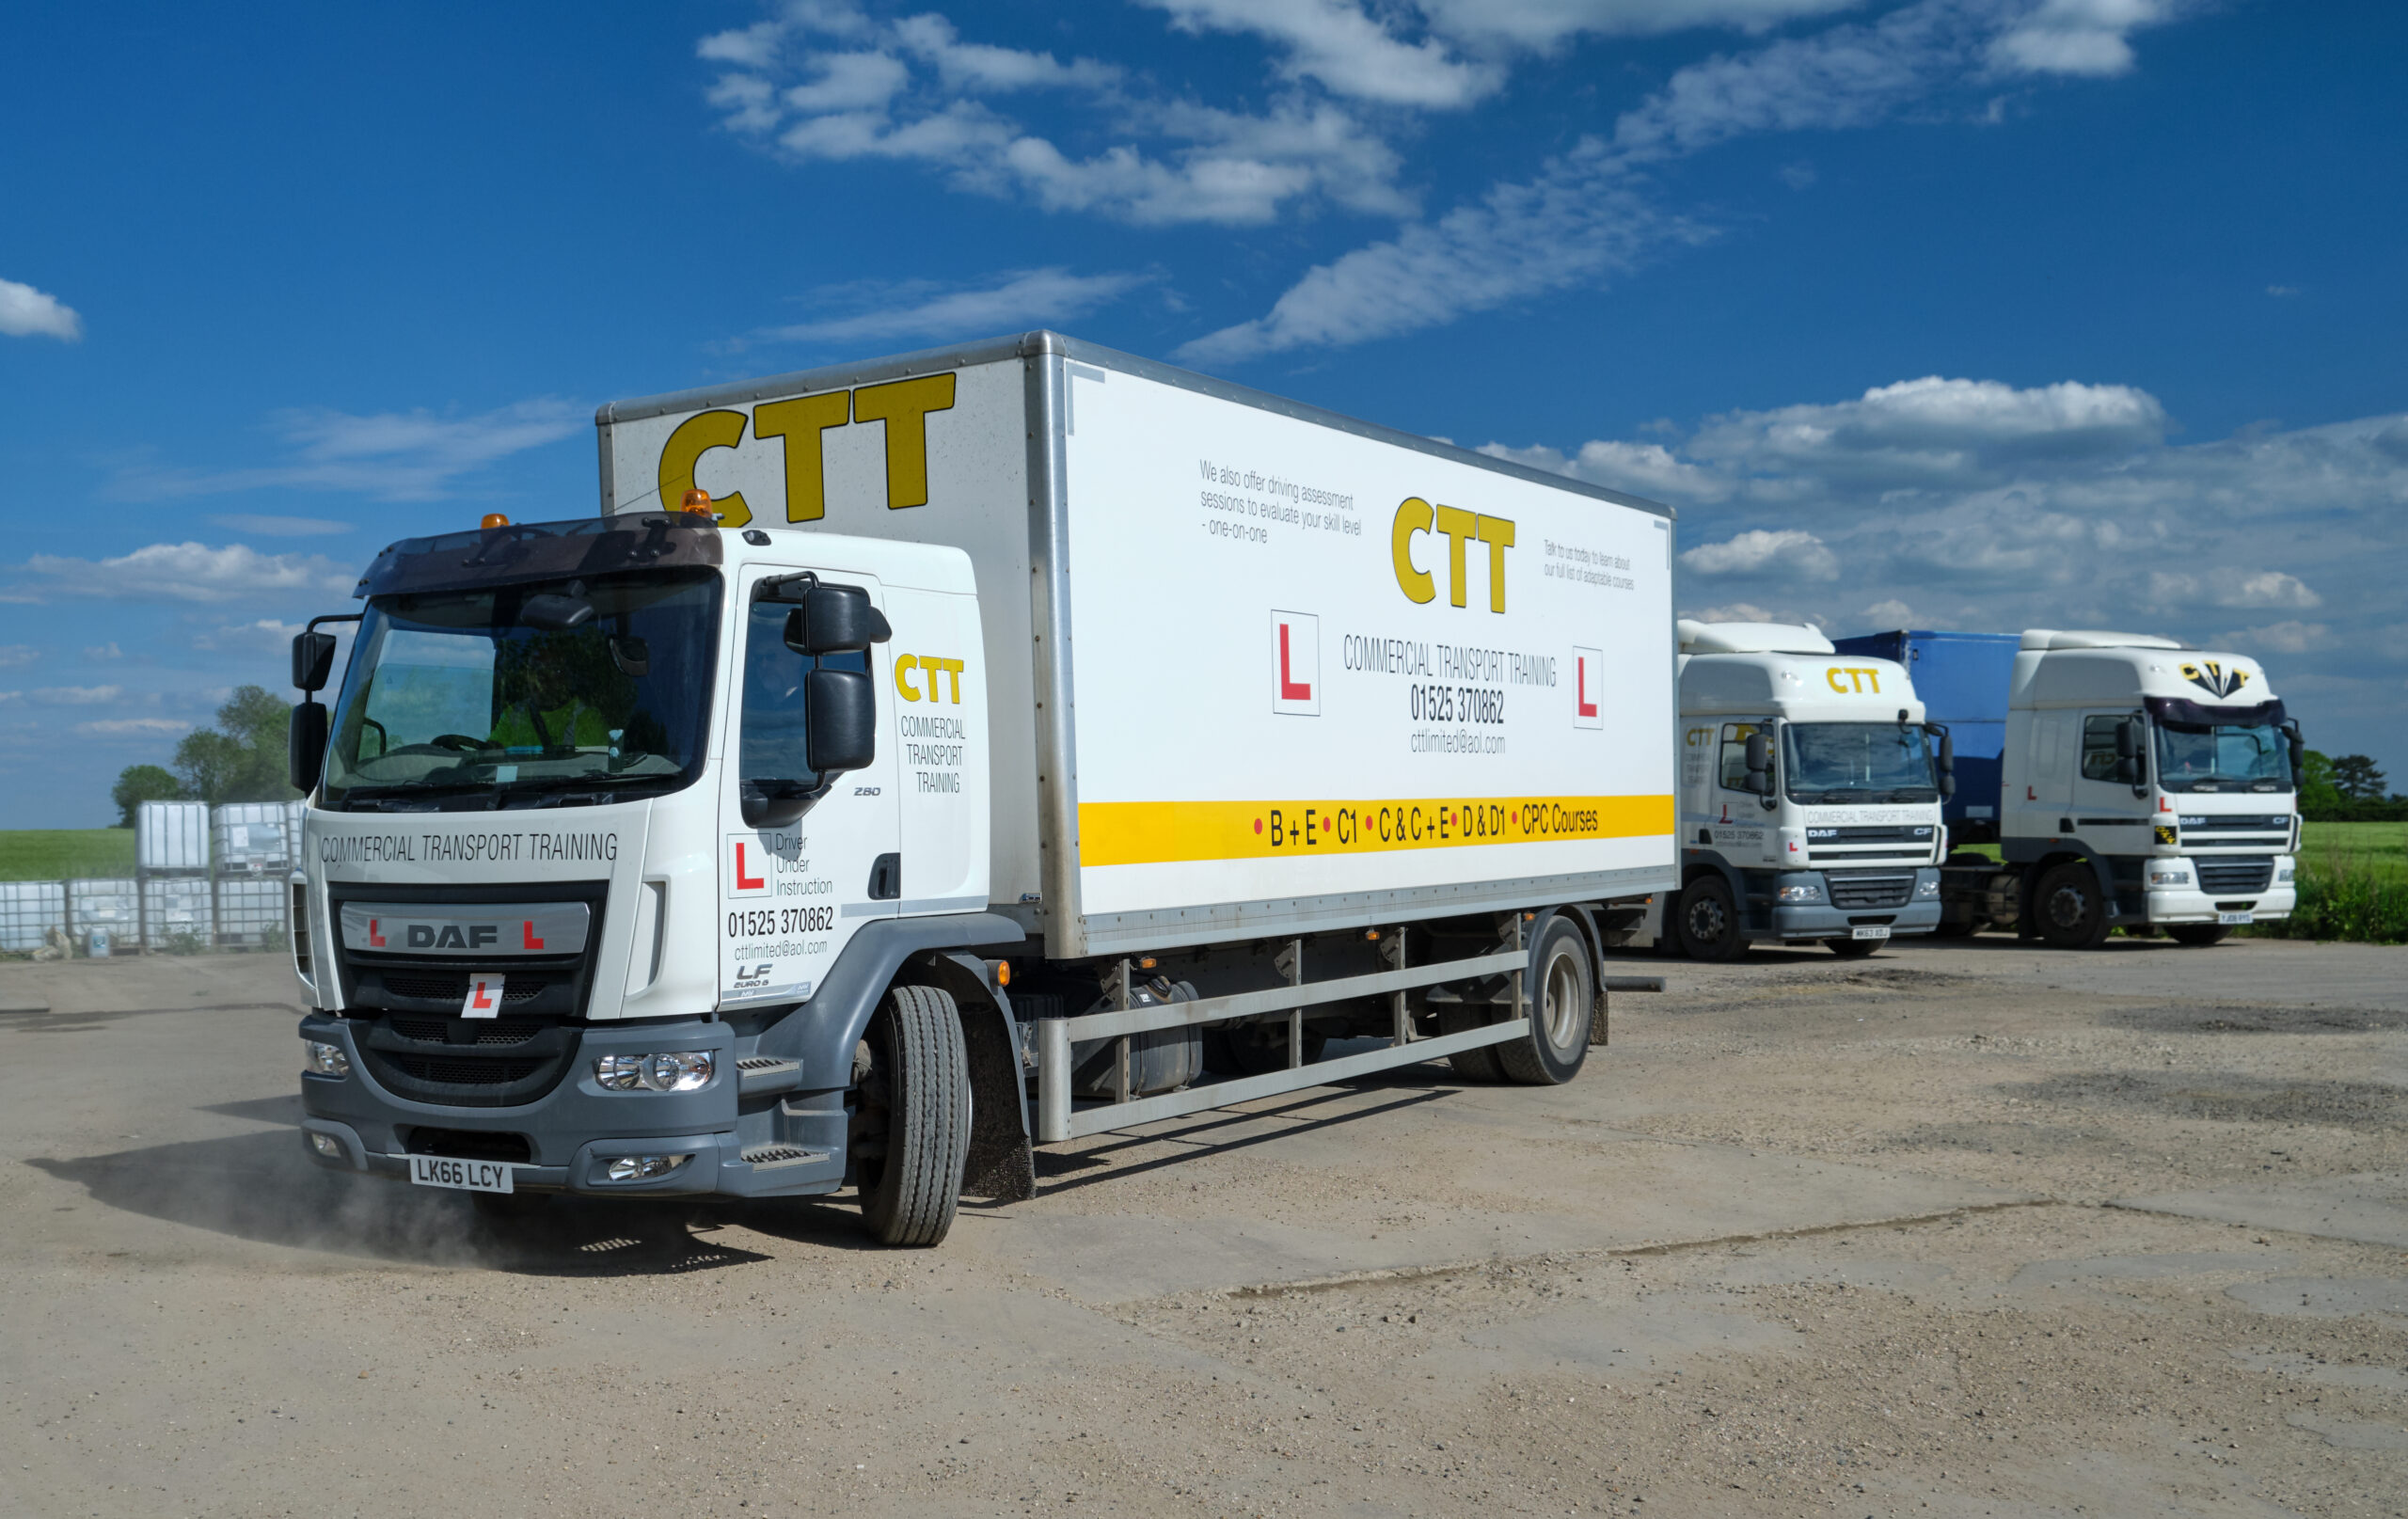 A picture of a CTT lorry departing for a training session